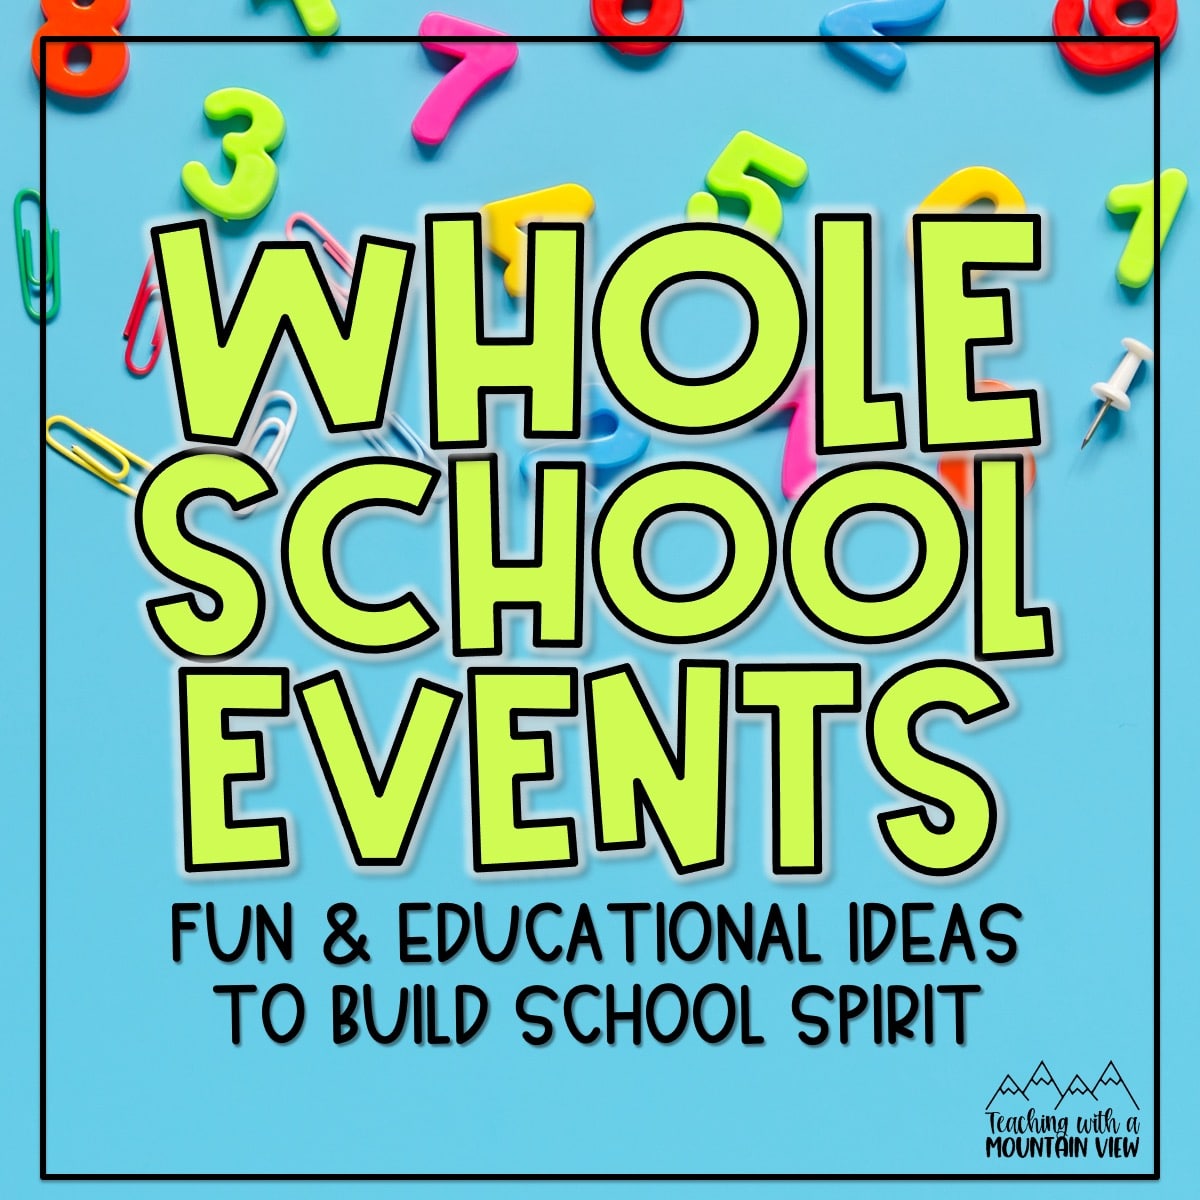 school-wide events for community